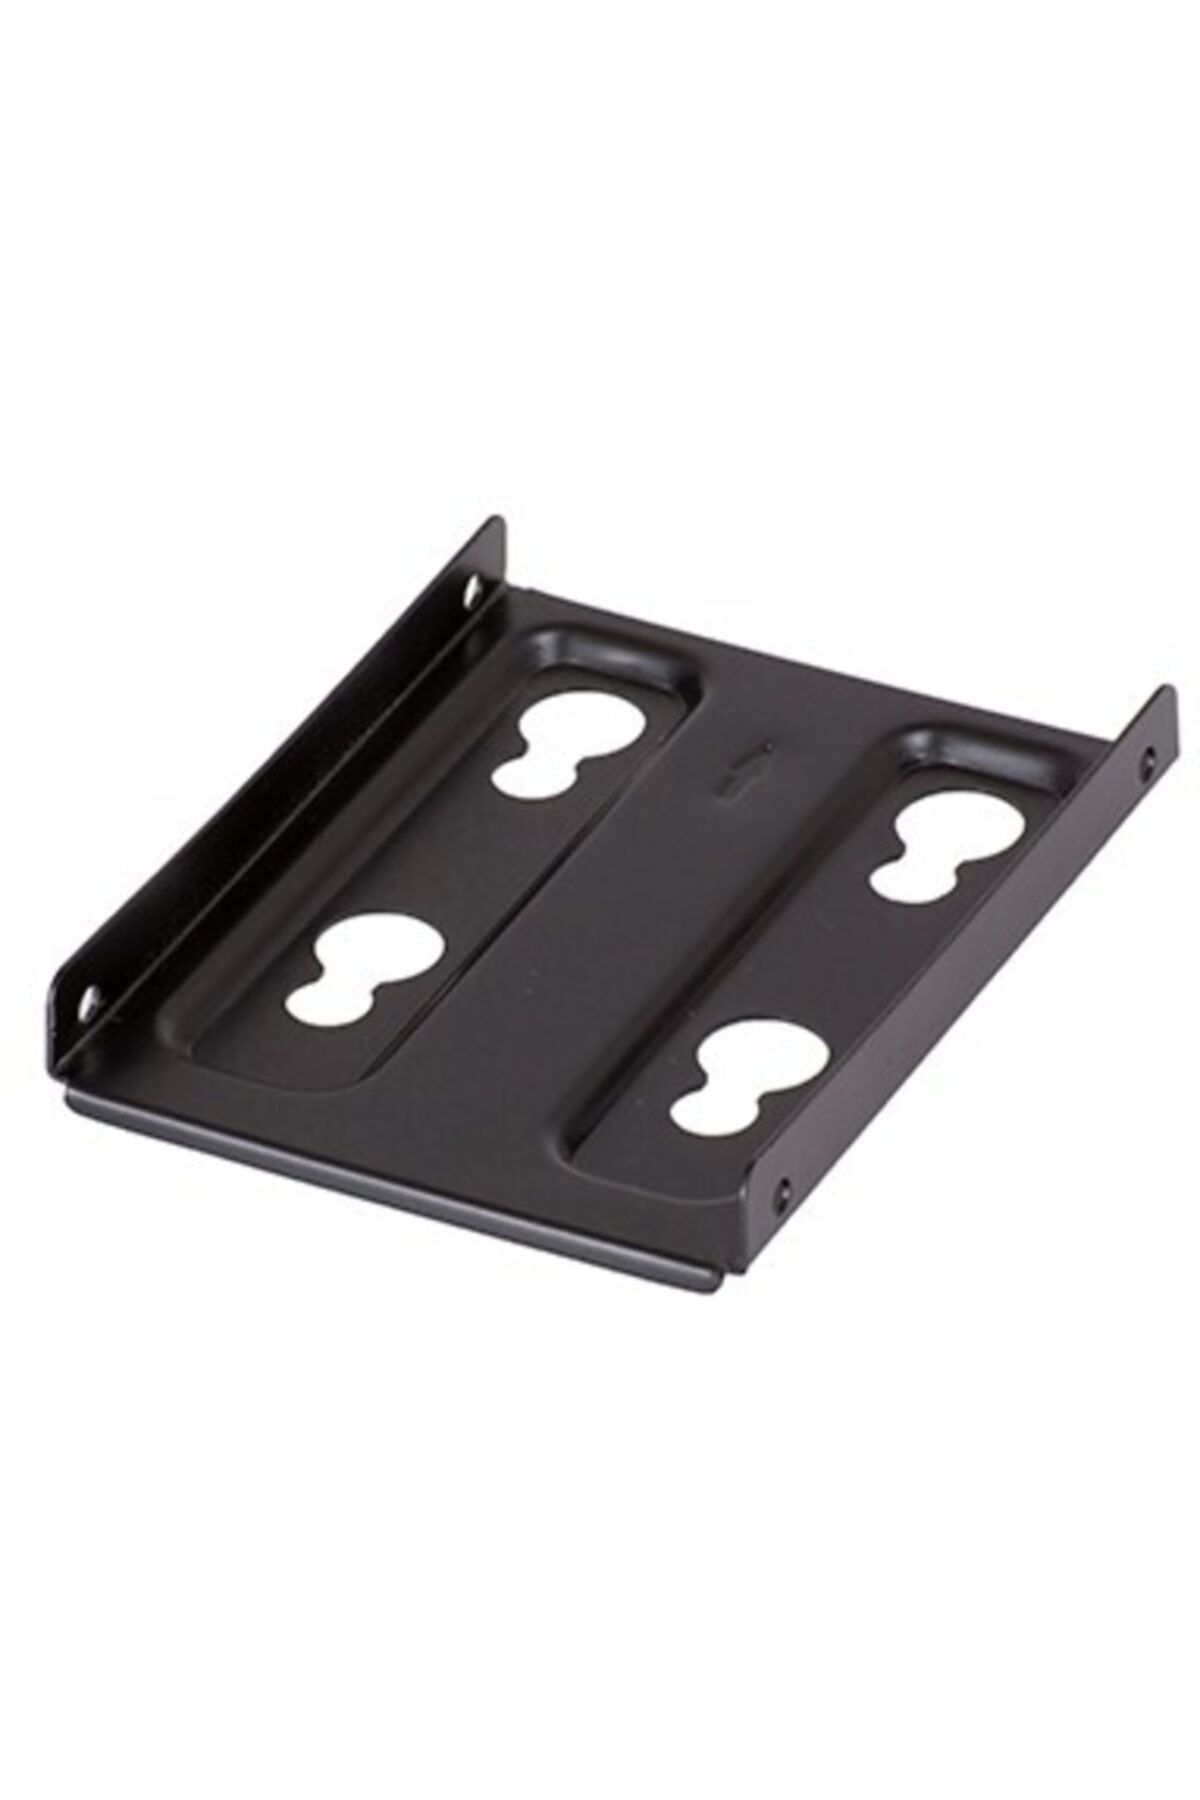 Phanteks Ssd Bracket For 1 In 1, Compatible With All Enthoo Series Kasa